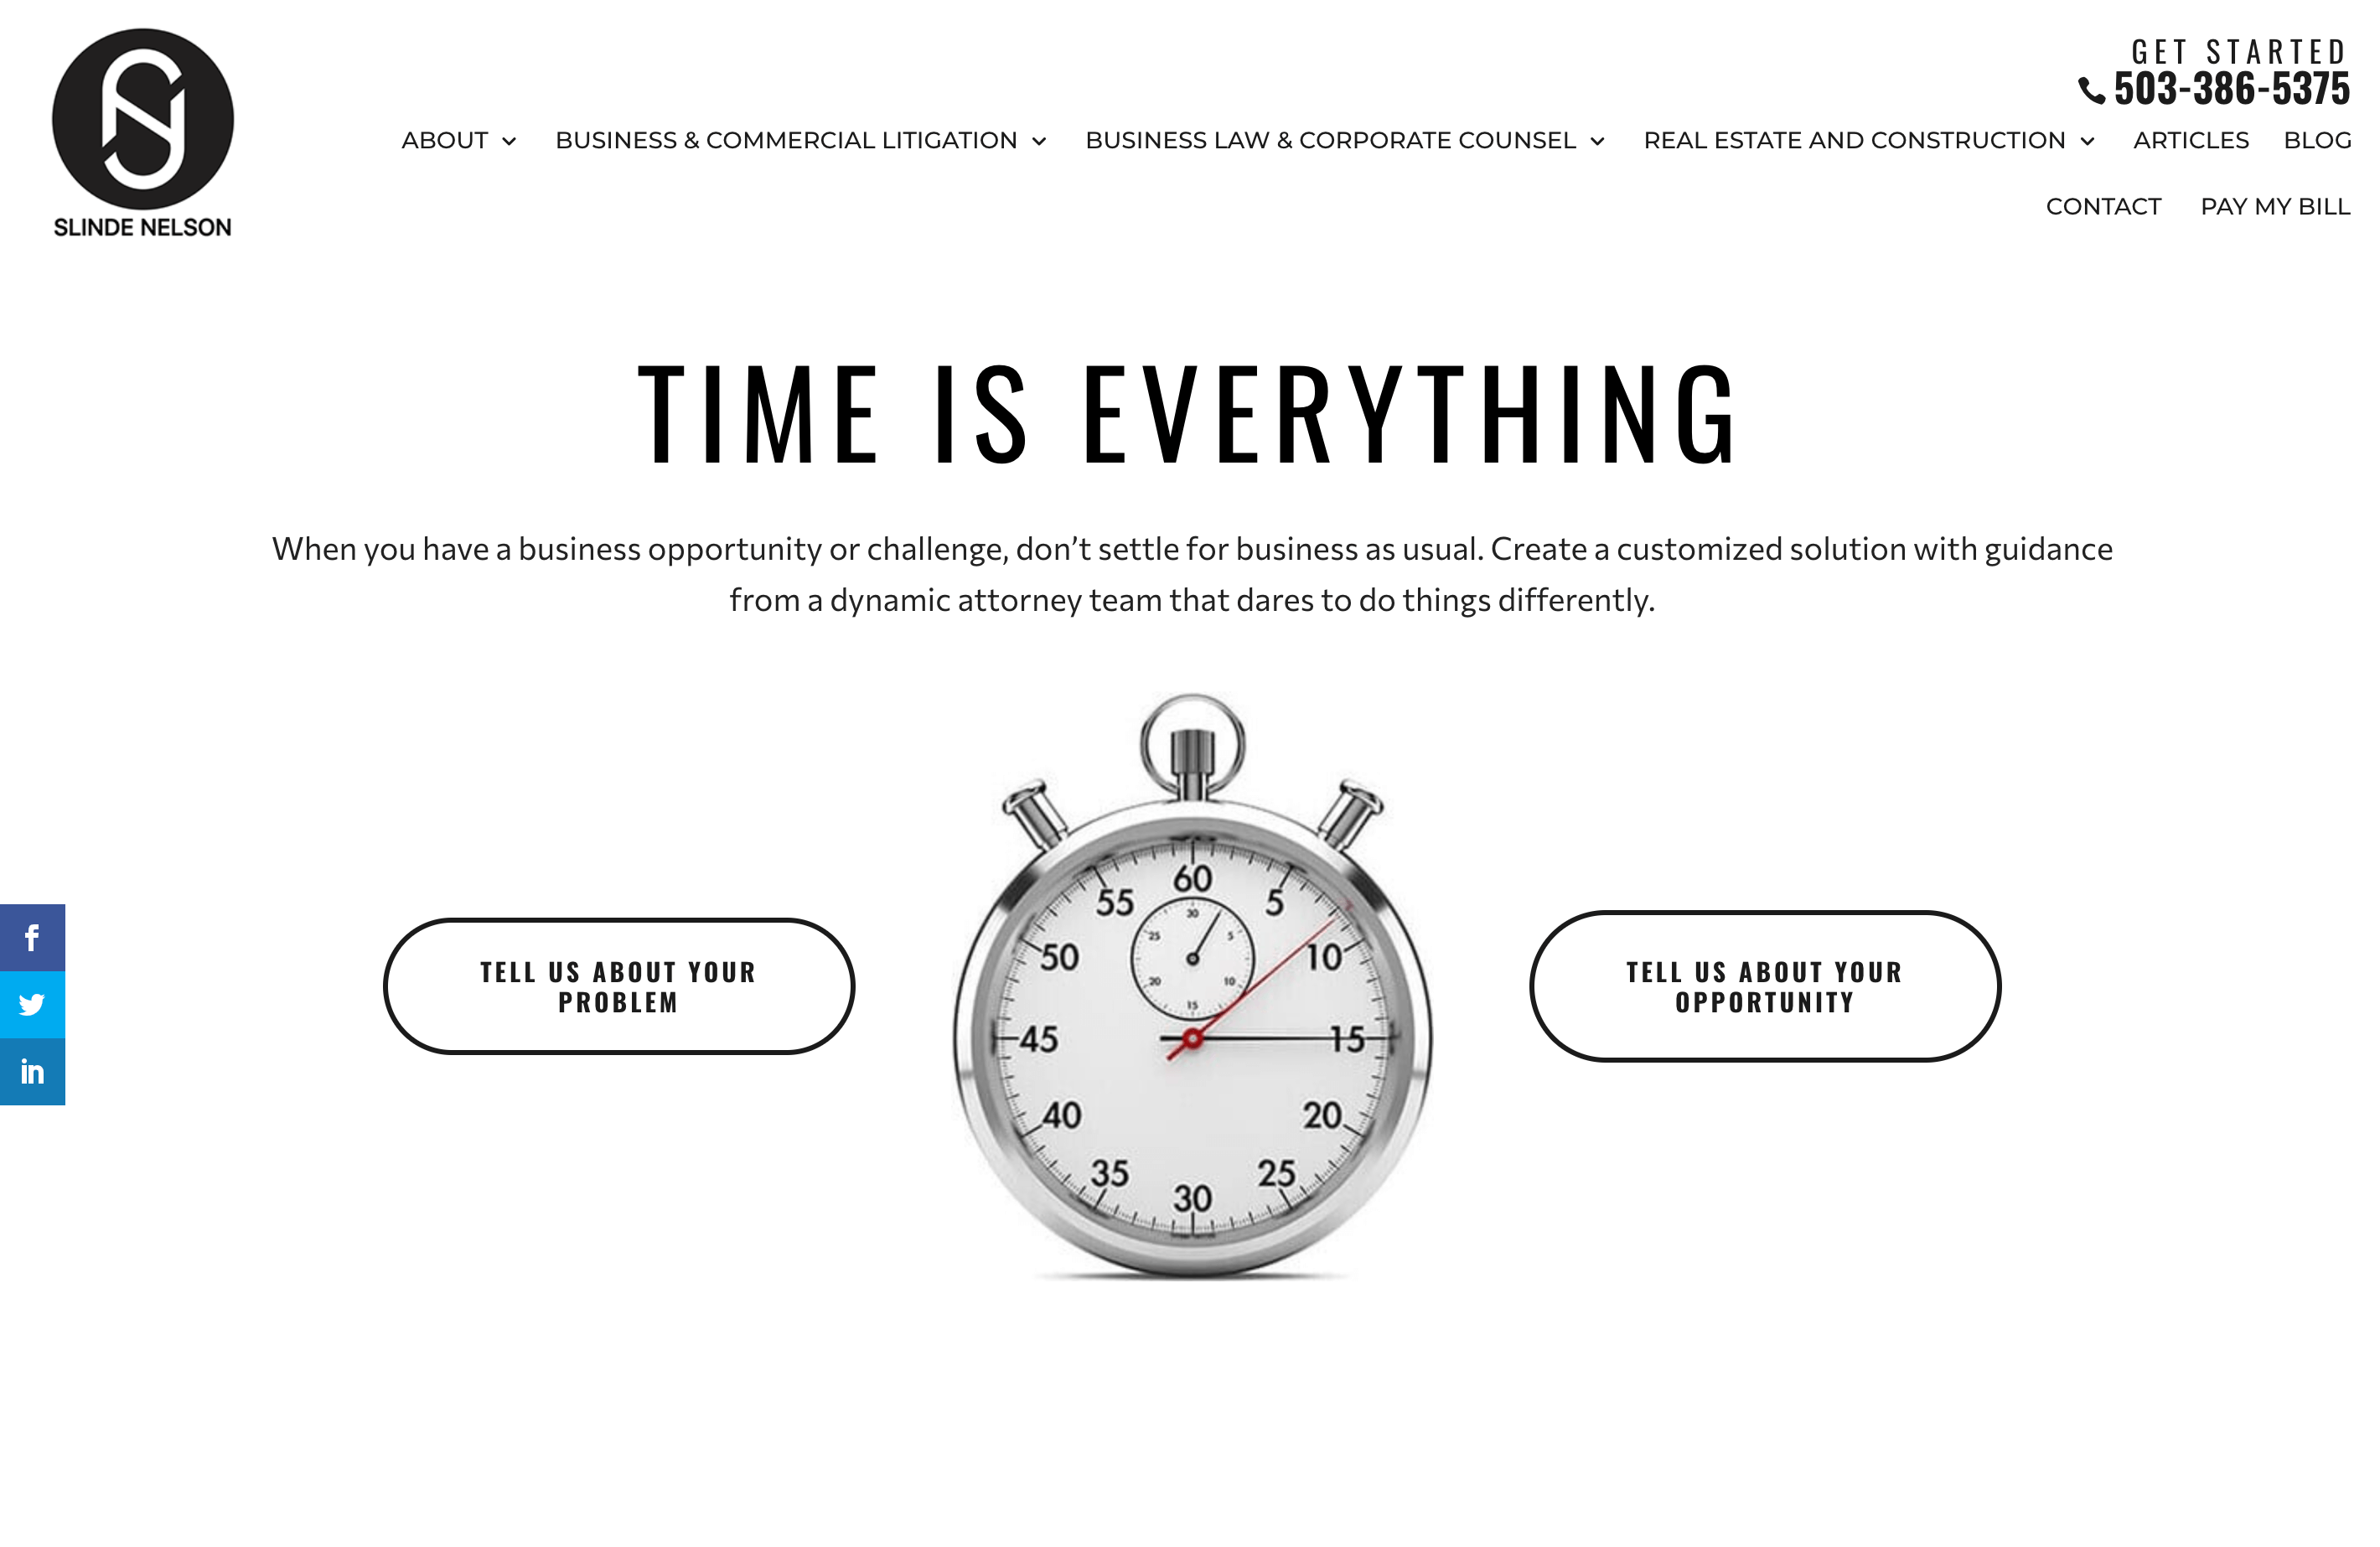 Slinde Nelson's homepage featuring a picture of a stopwatch, buttons that read "tell us about your problem" and "tell us about your opportunity," and the words "Time is everything"